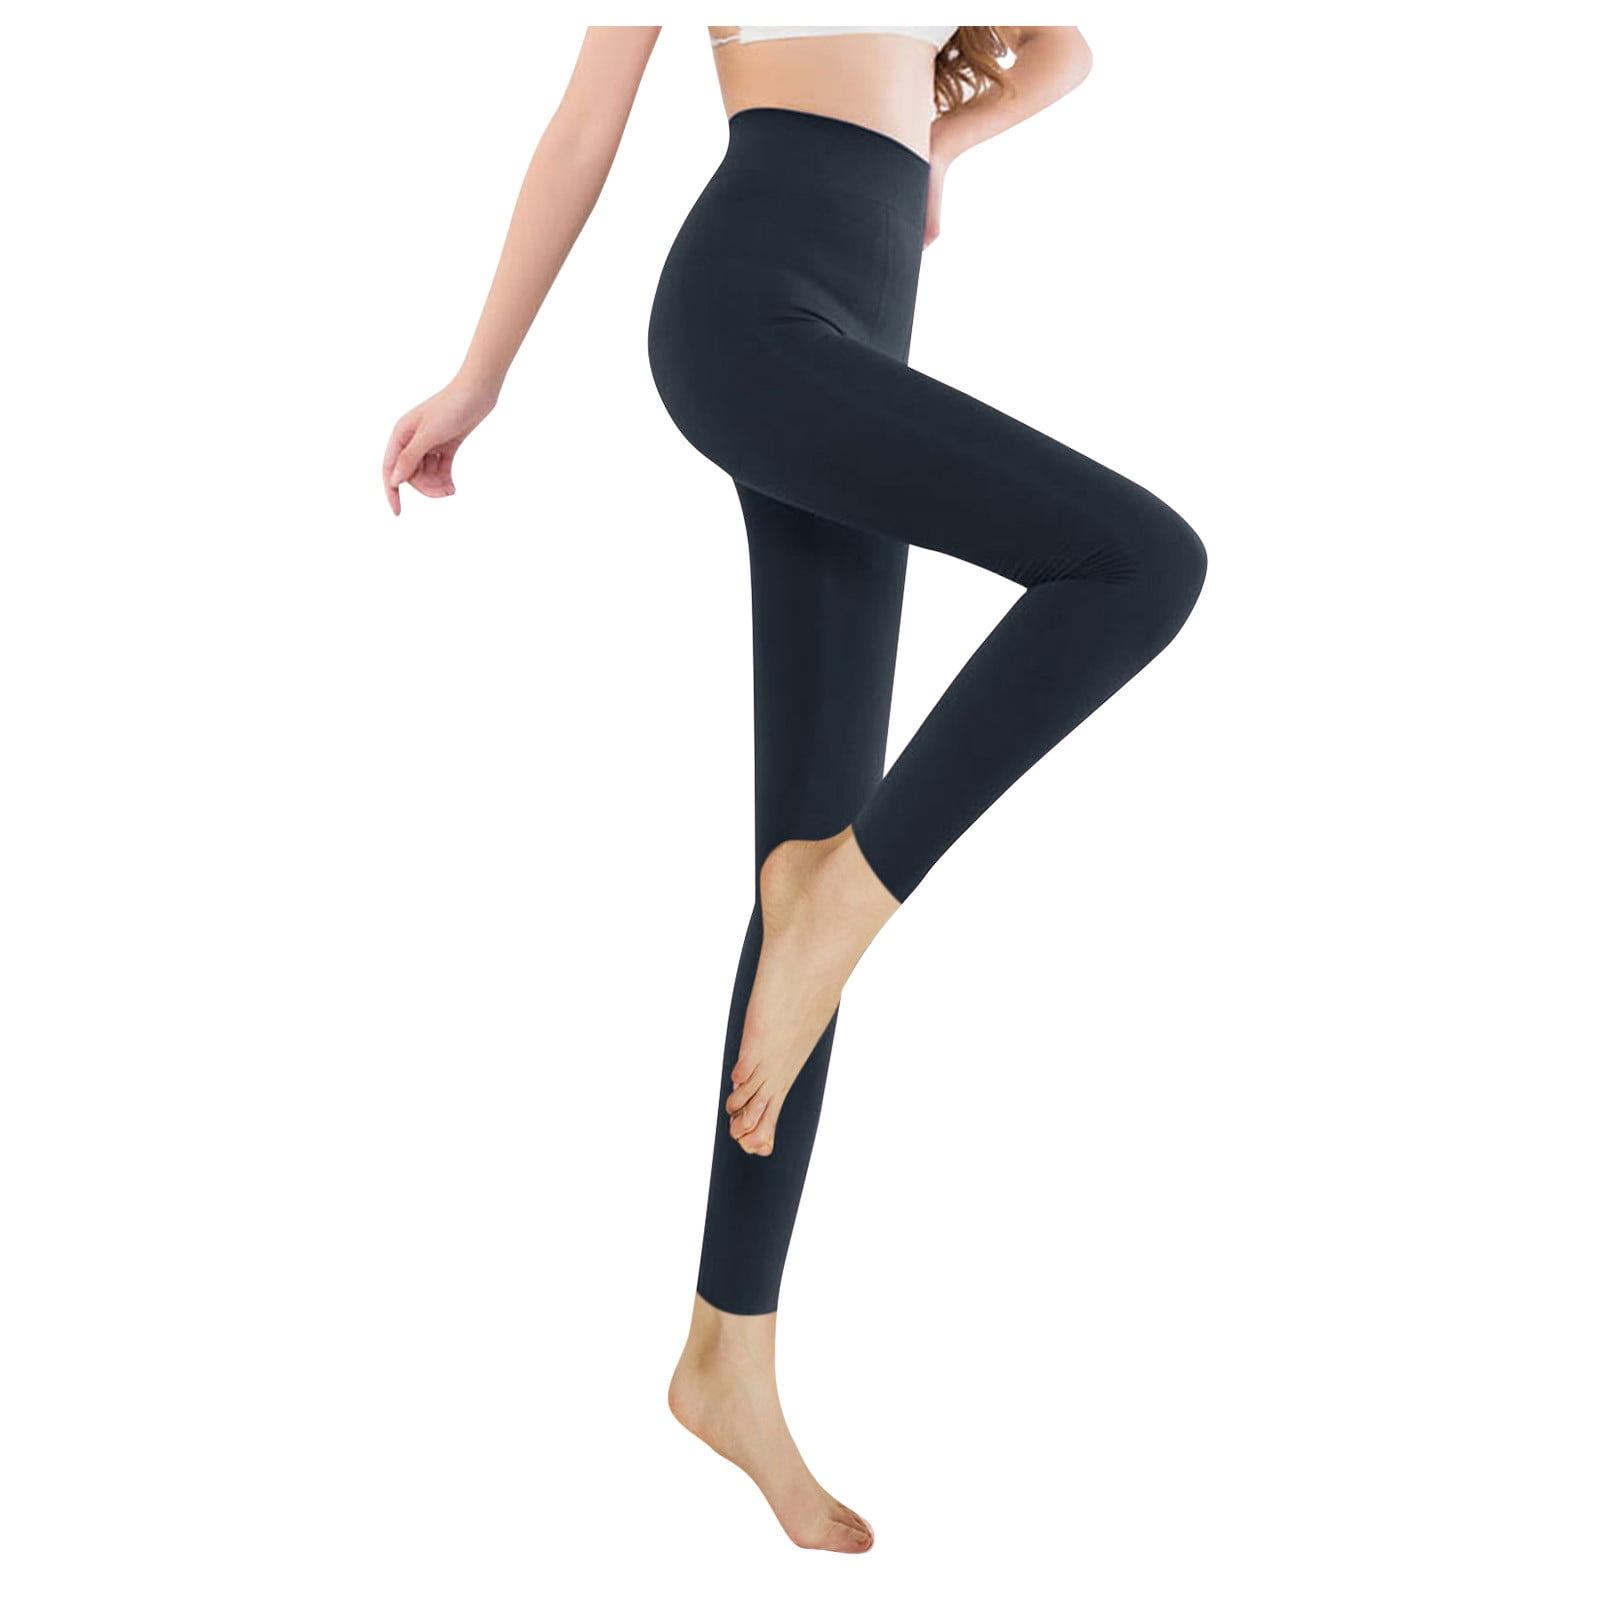 HSMQHJWE Yoga Pants Tall Ladies Leggings Women'S Leggings Autumn Winter  High Waist Lined Thick Trousers Winter Thick Opaque Leggings 7/8 Cotton  Leggings For Women High Waist 